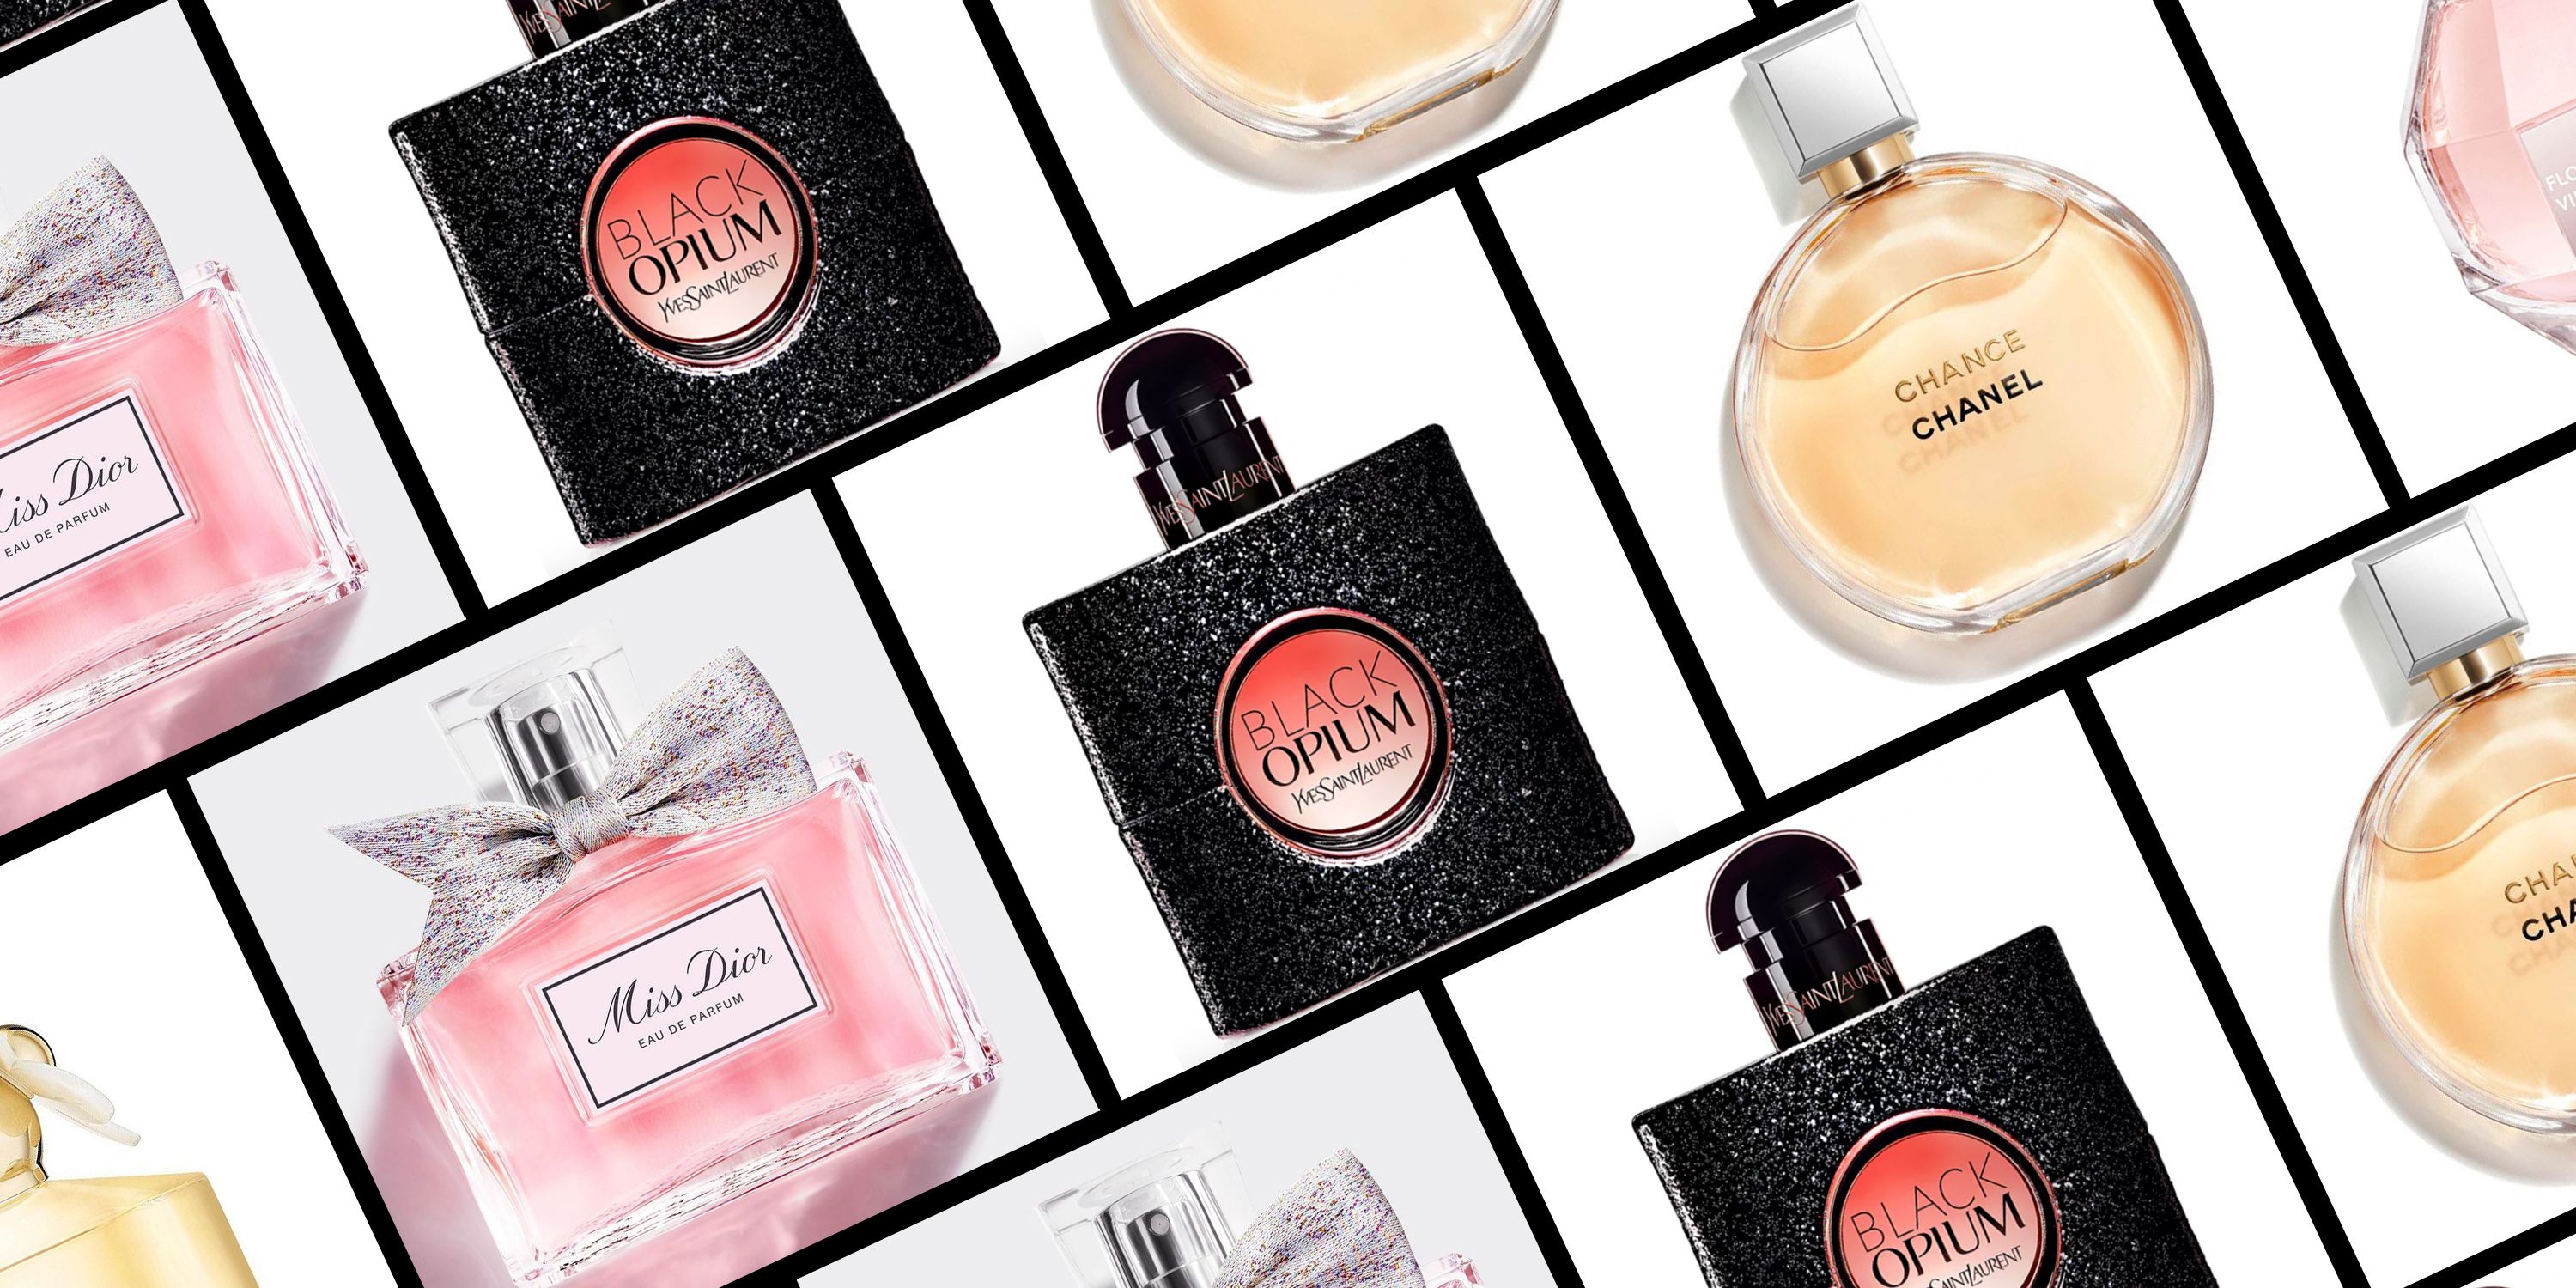 The 20 Best Perfumes of All Time